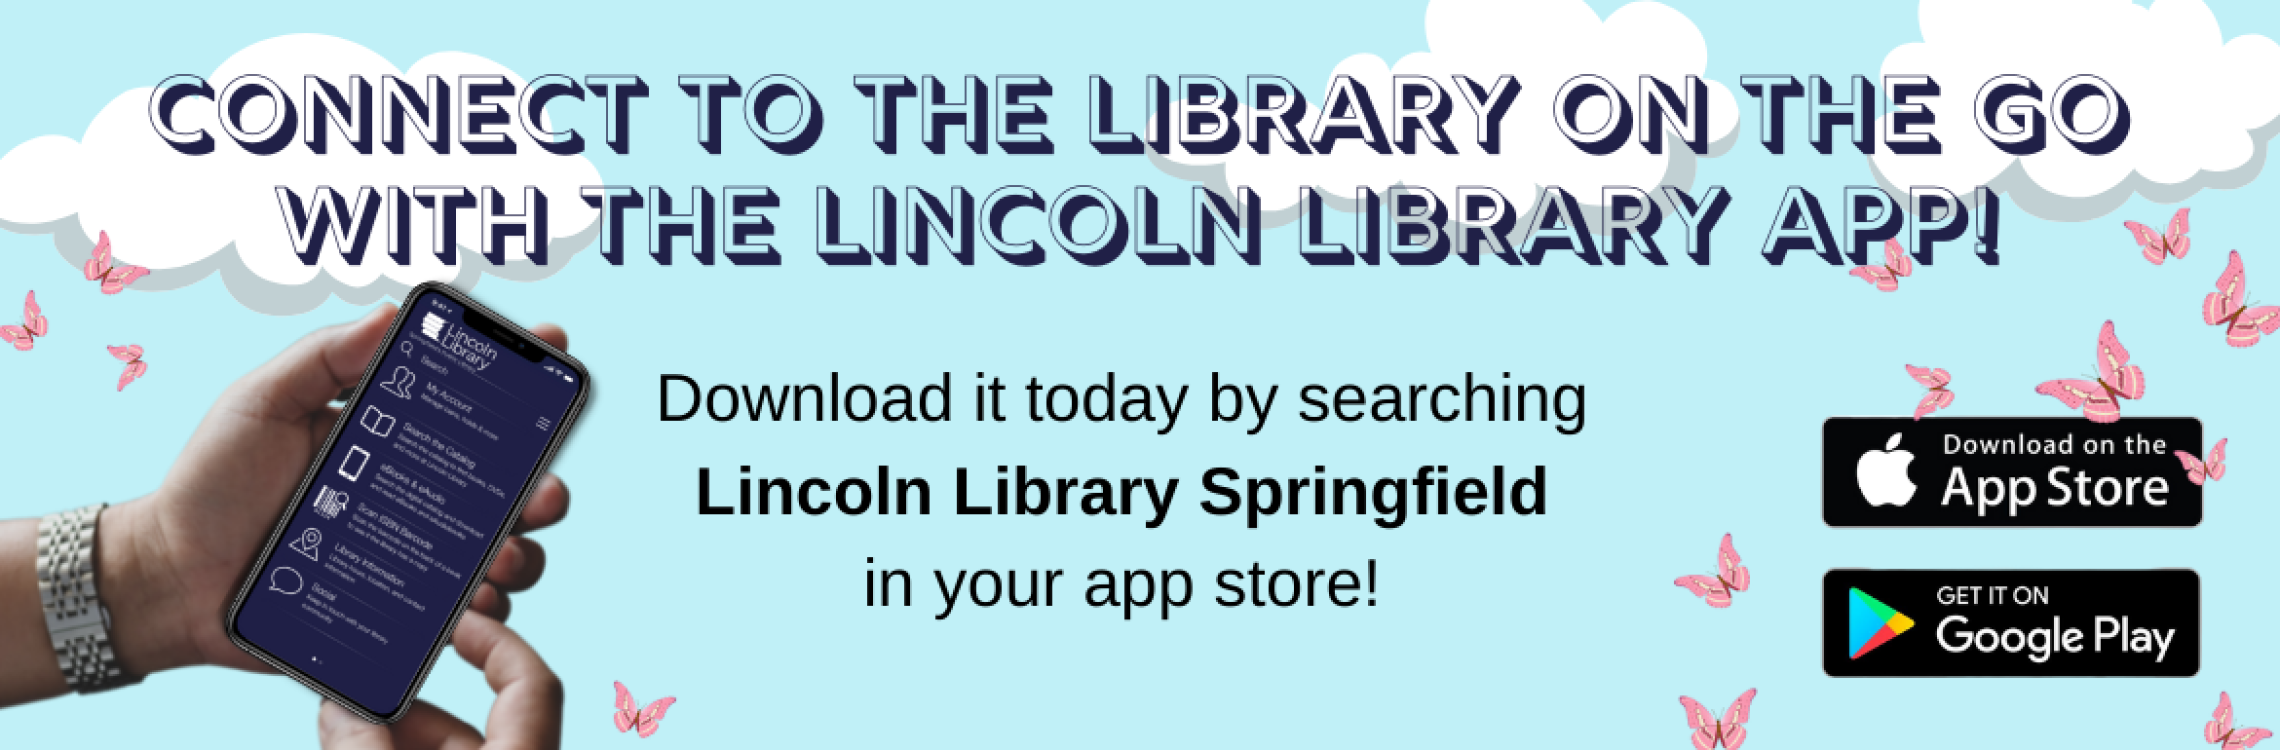 Connect with the library on the go with the Lincoln Library app. Download it by searching Lincoln Library in your app store.